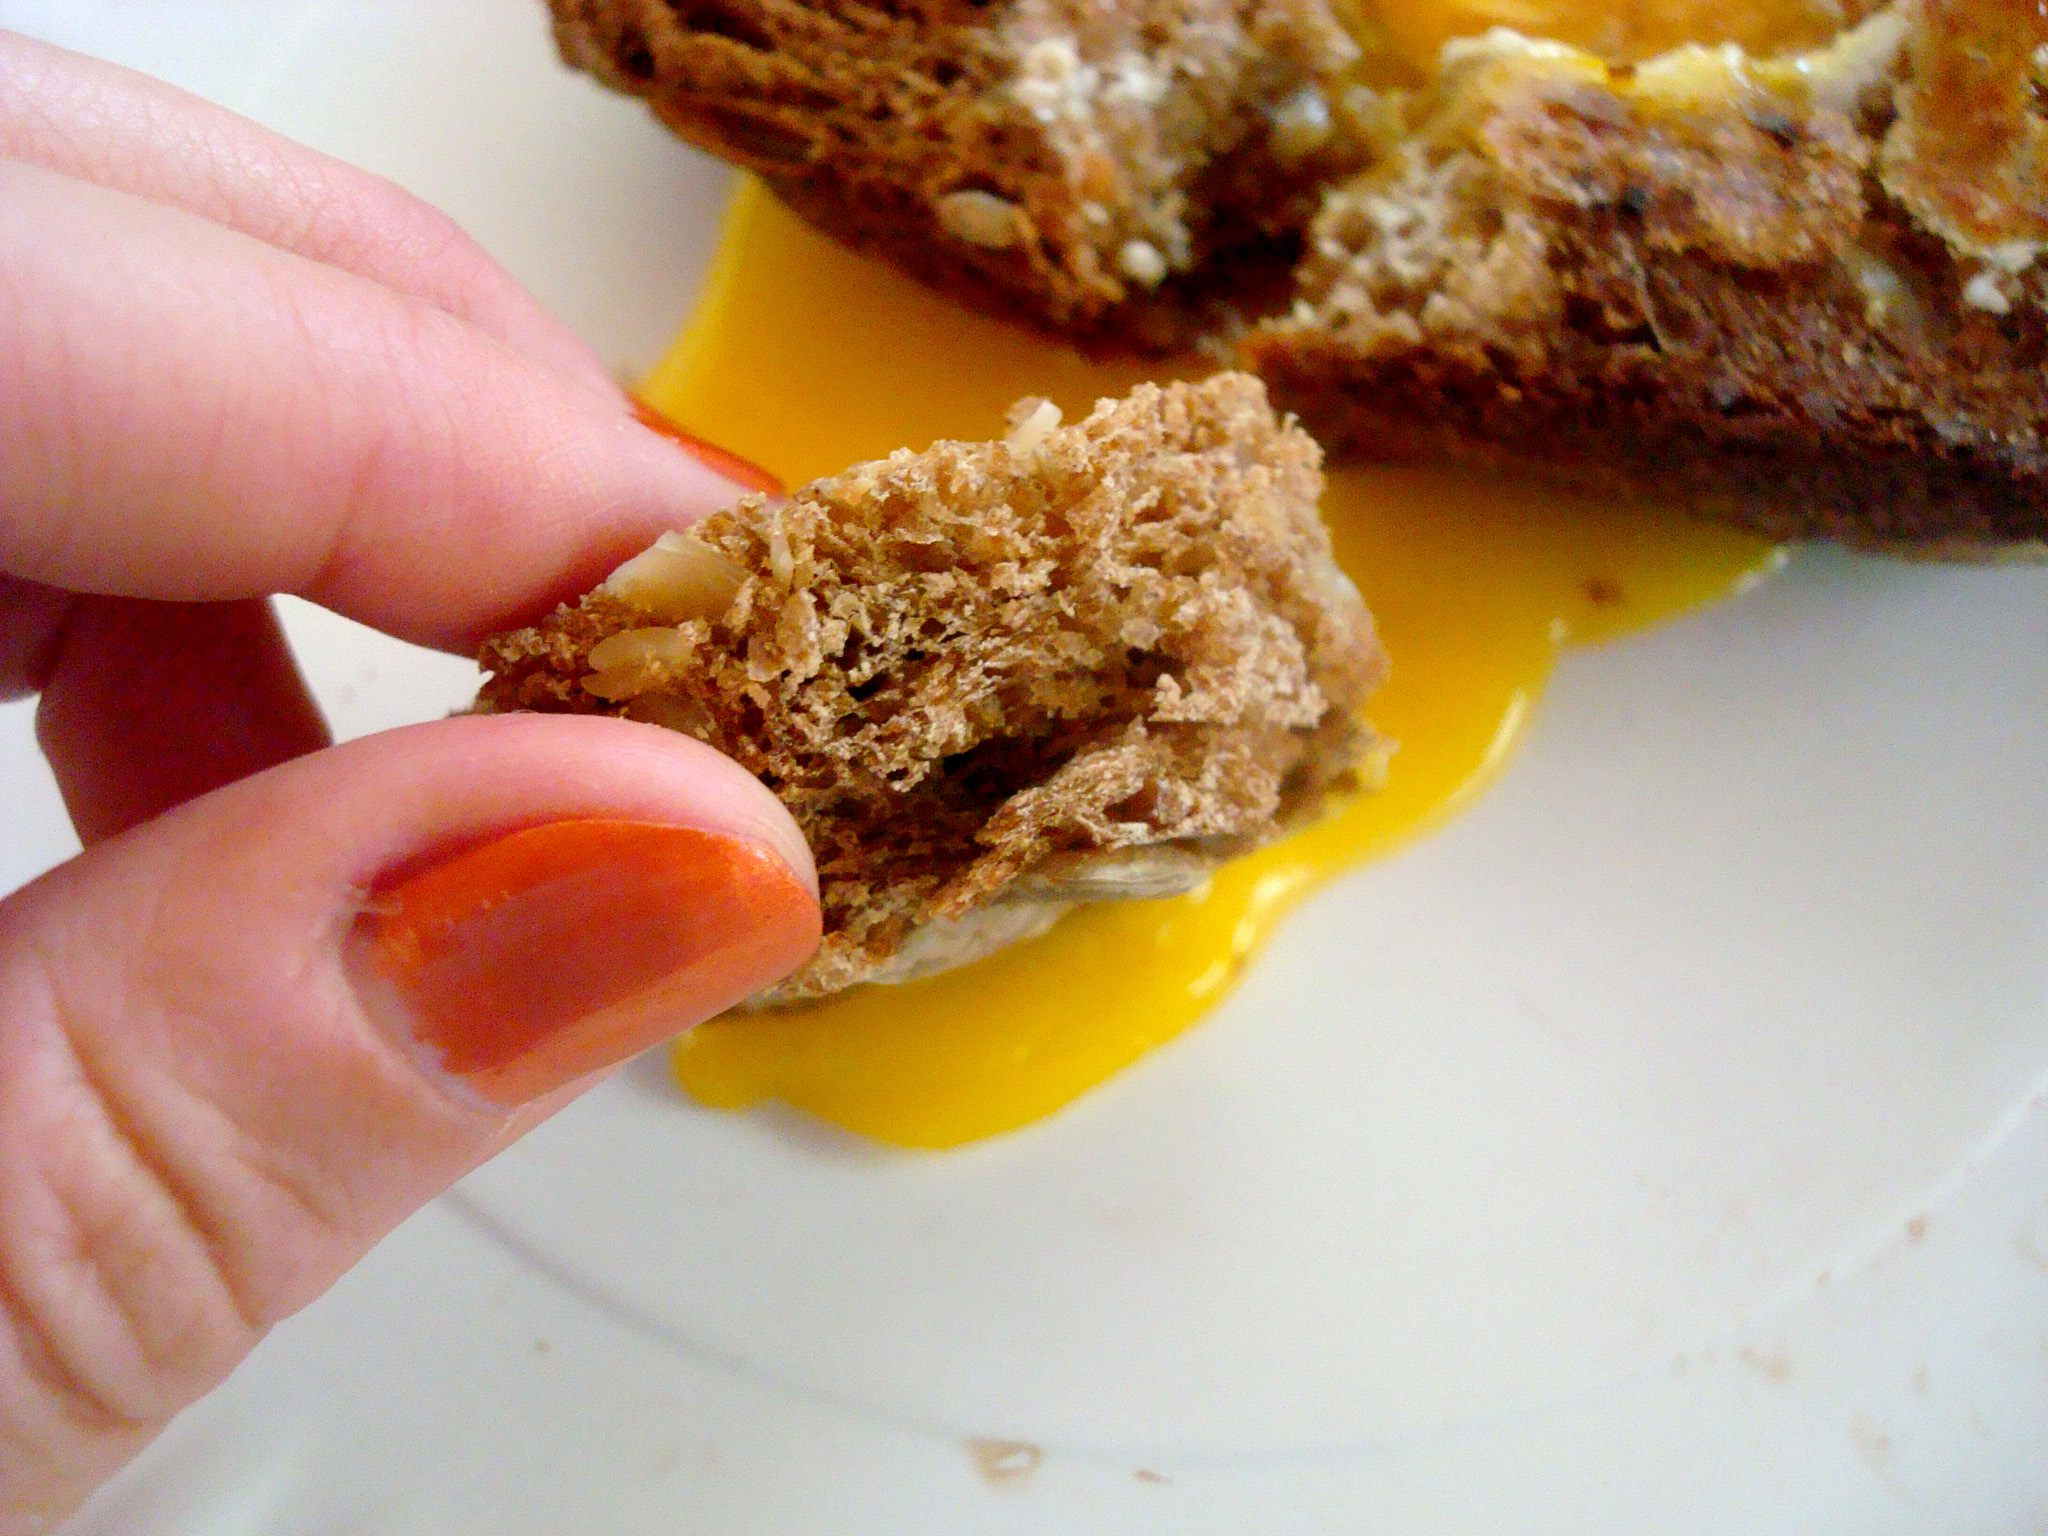 Dip the extra bread in the yolk